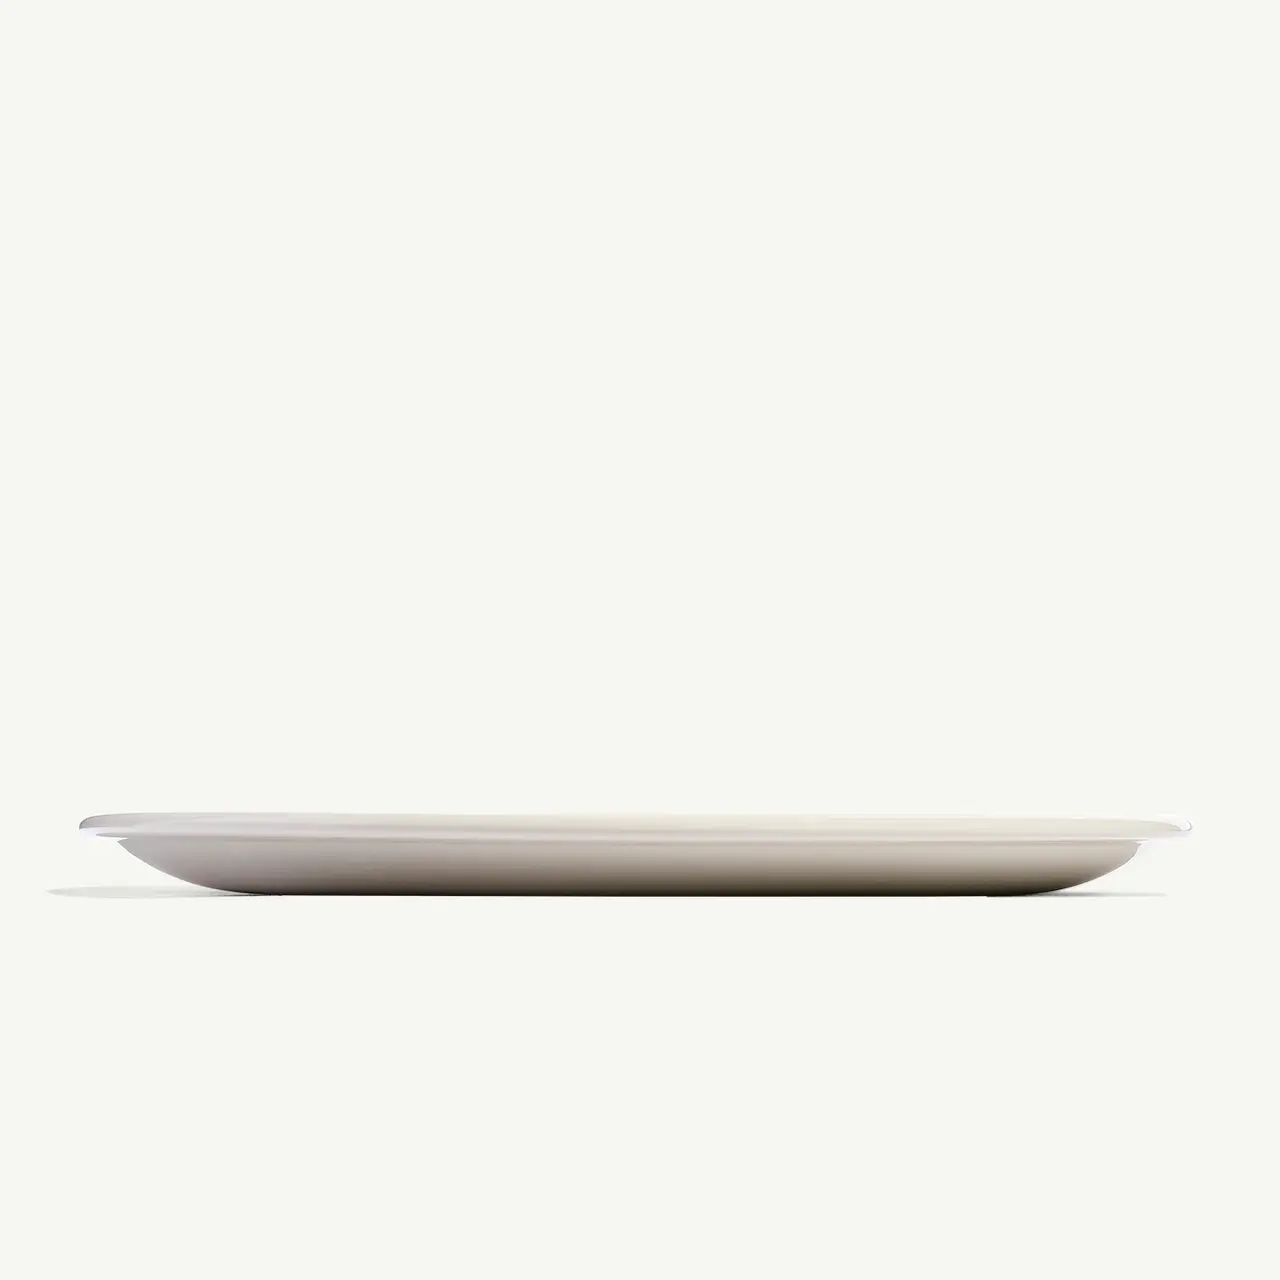 A side view of a simple white plate against a light background, showing its thin profile.